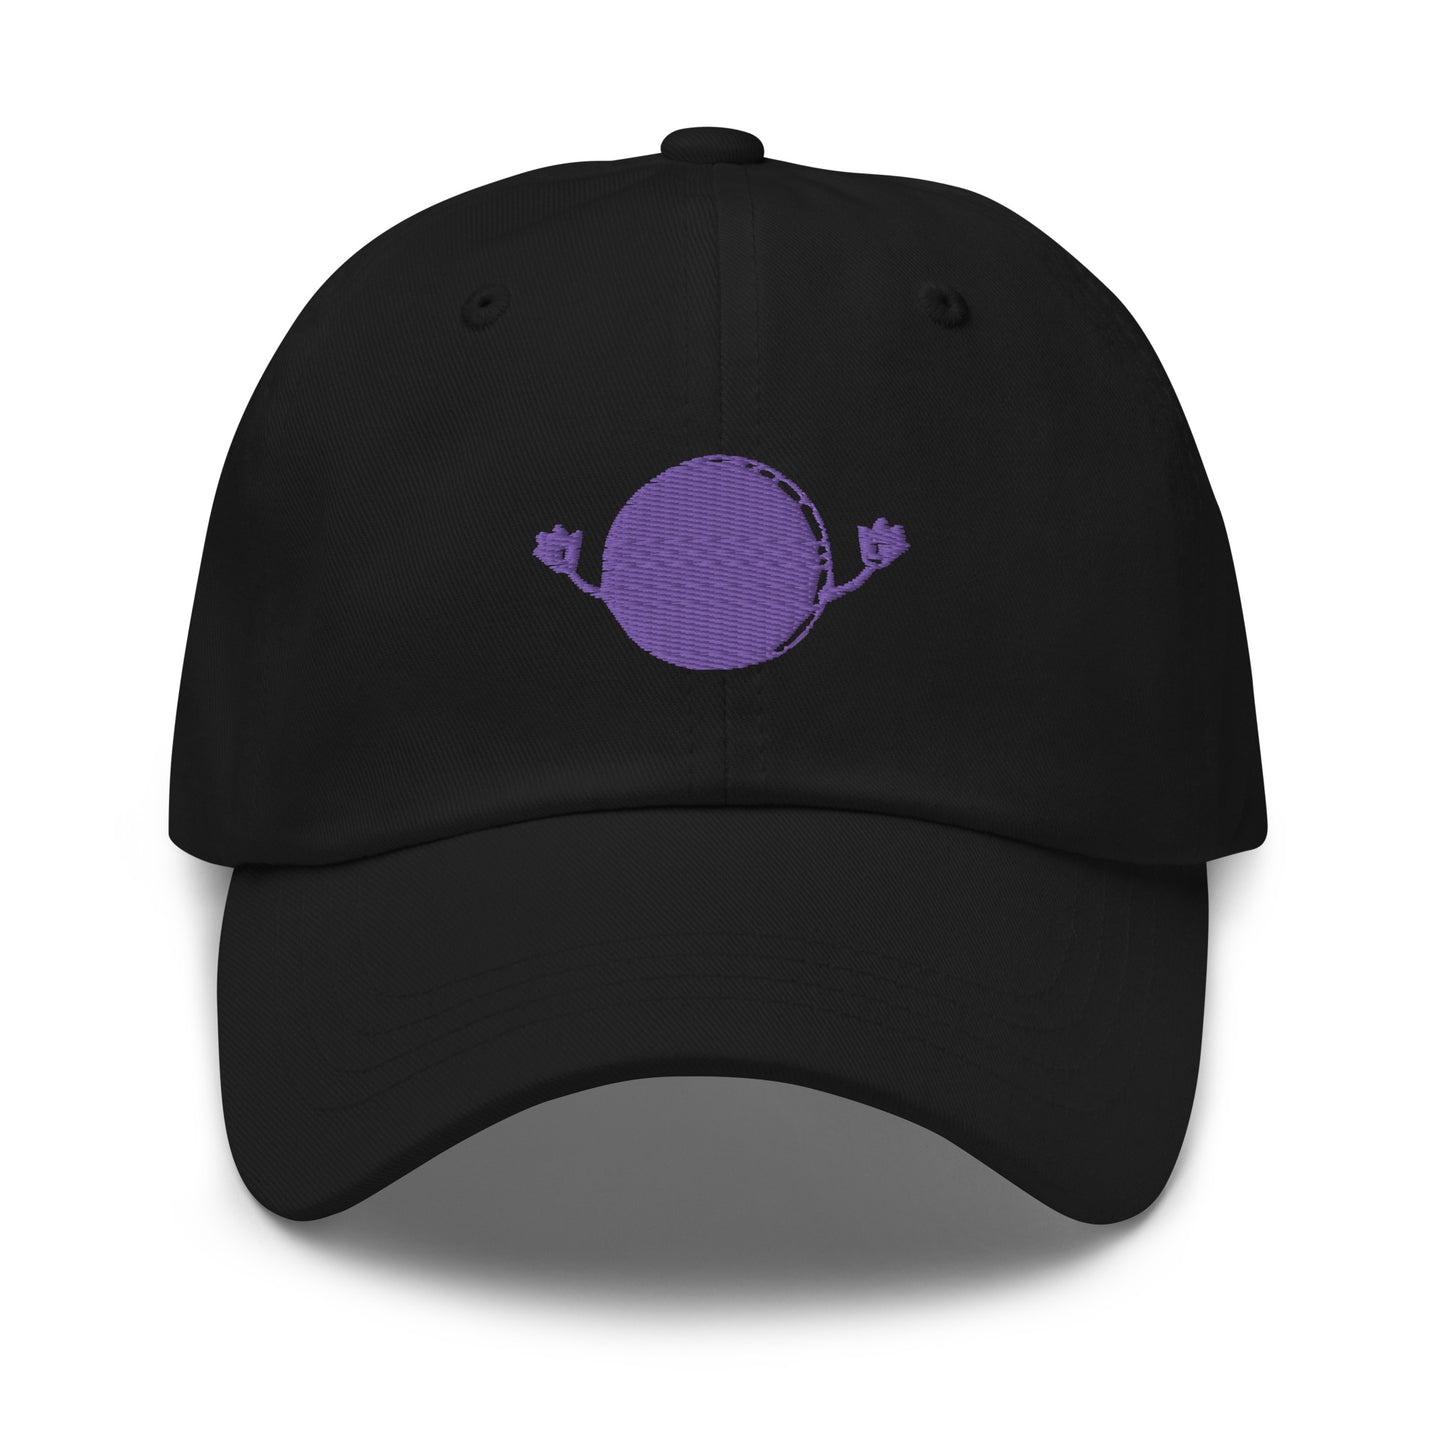 QSTN—Coin embroidery cap